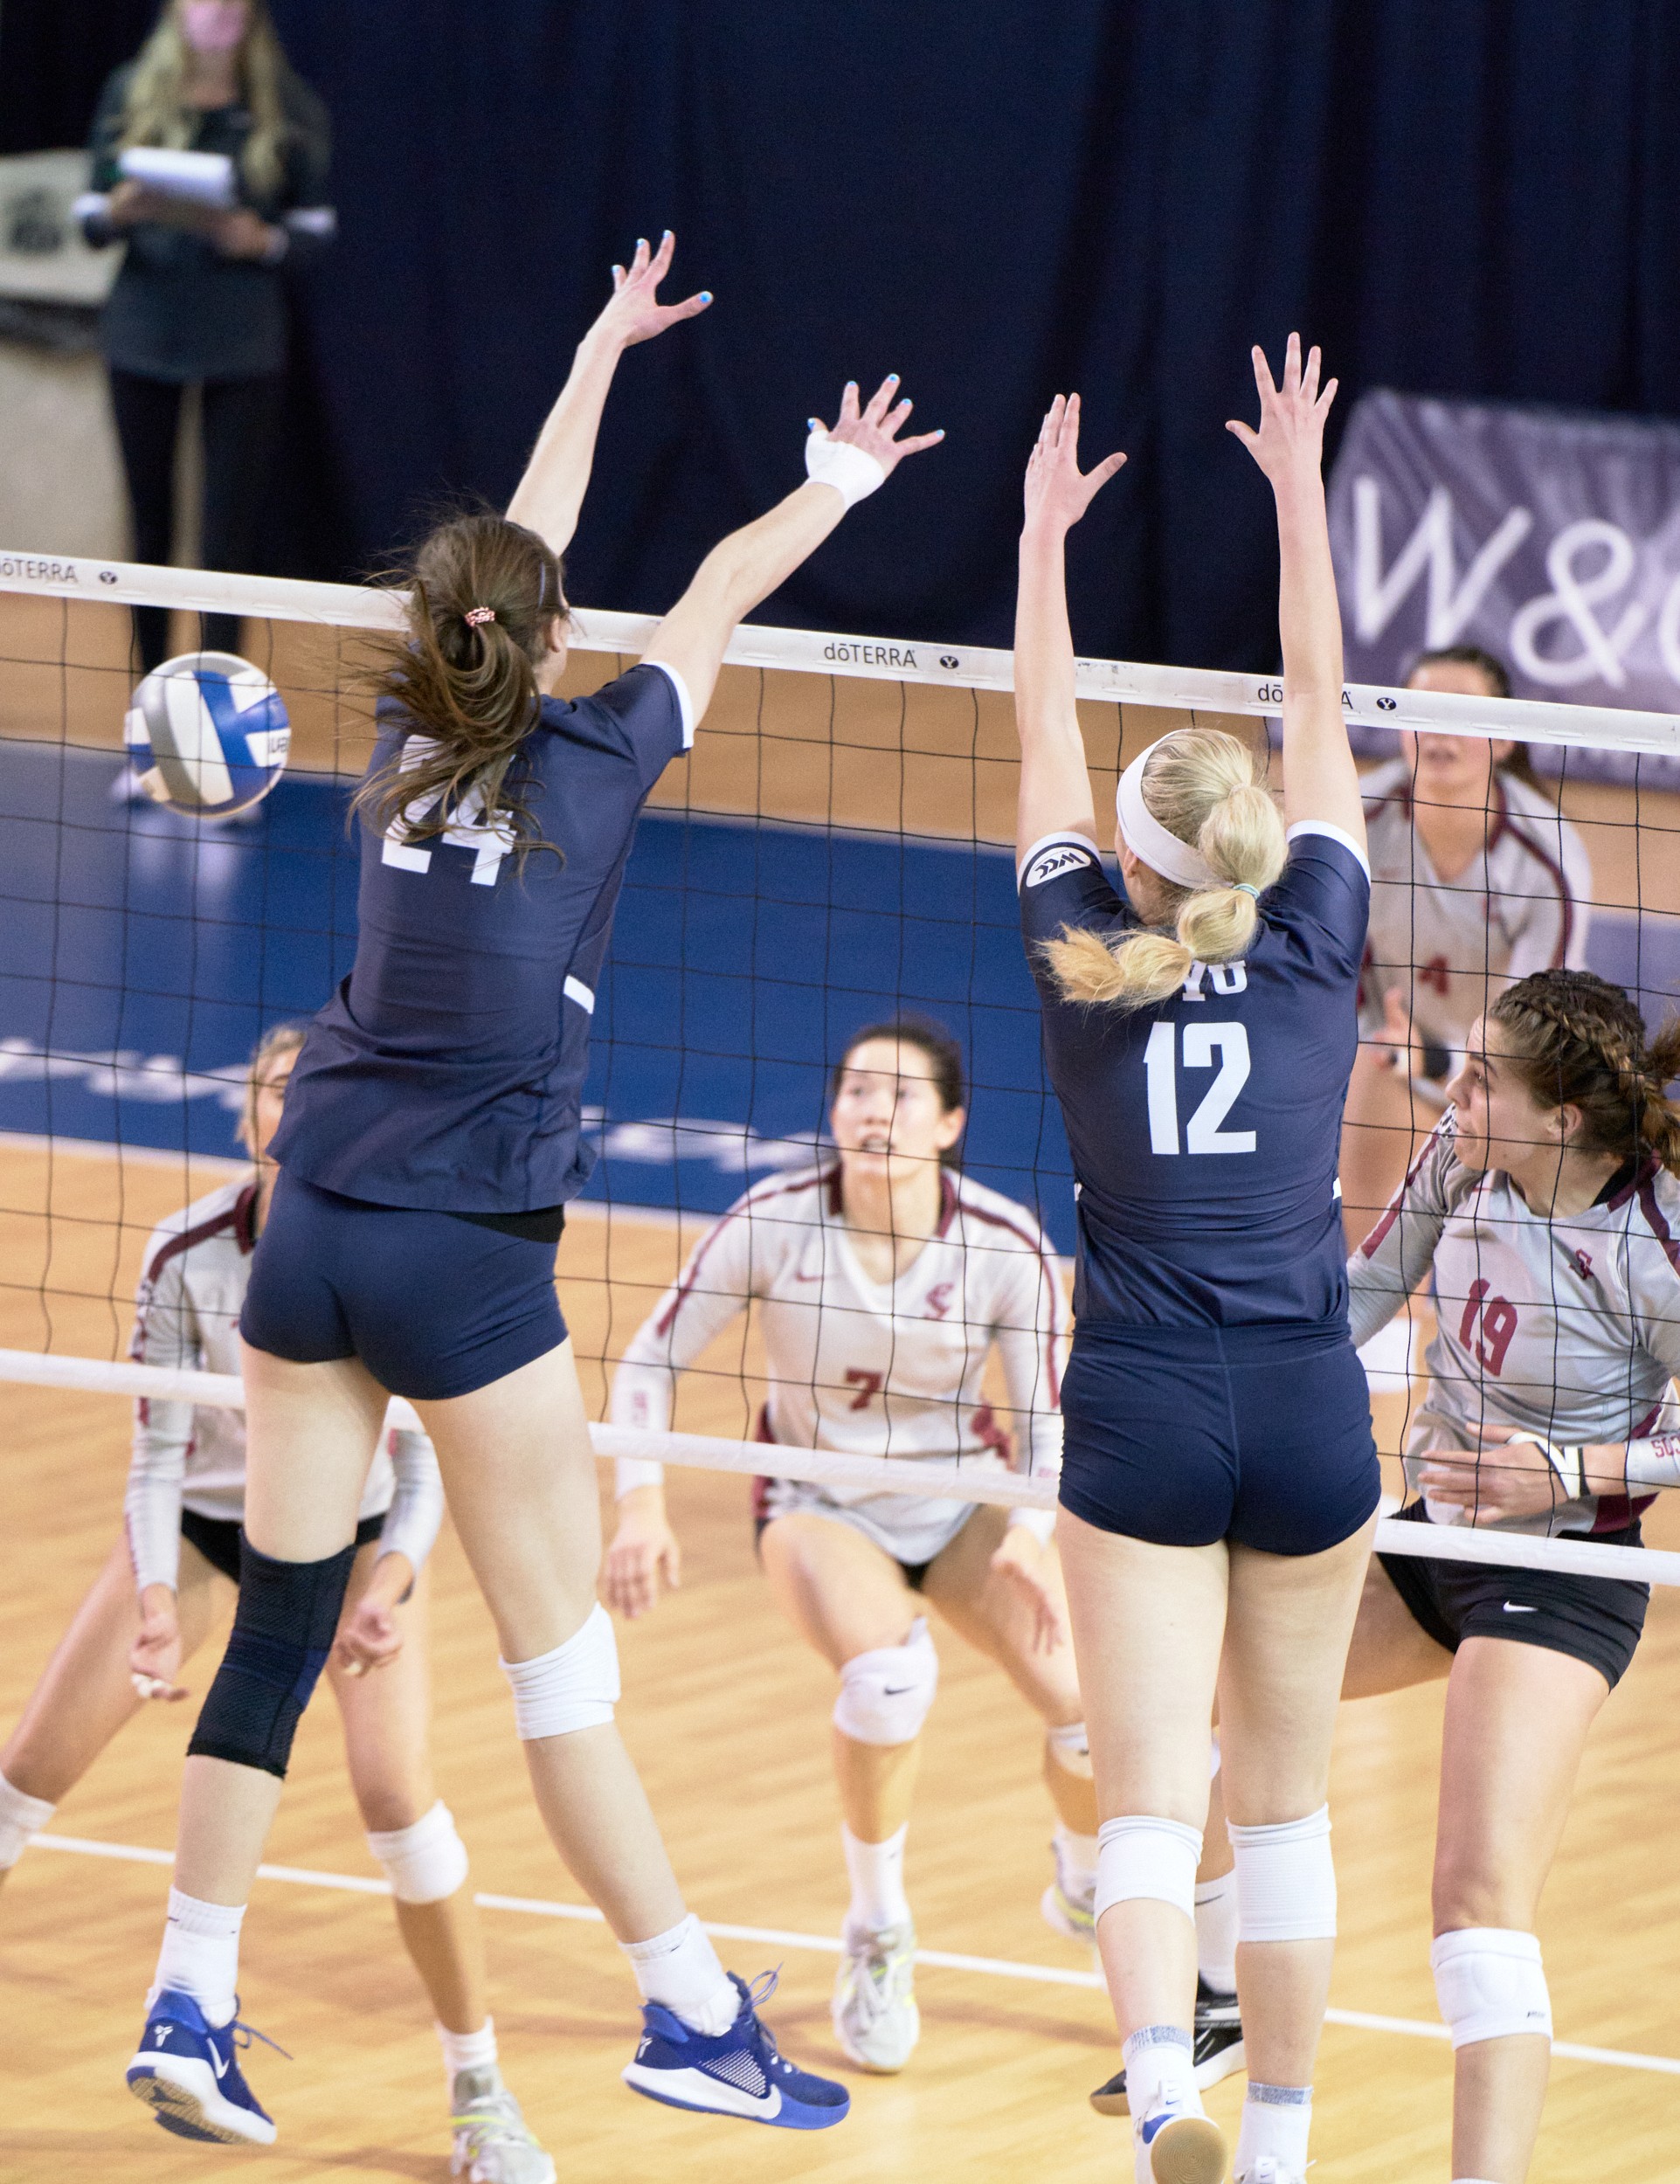 No Byu Women S Volleyball Picks Up Th Wcc Title After Sweeping